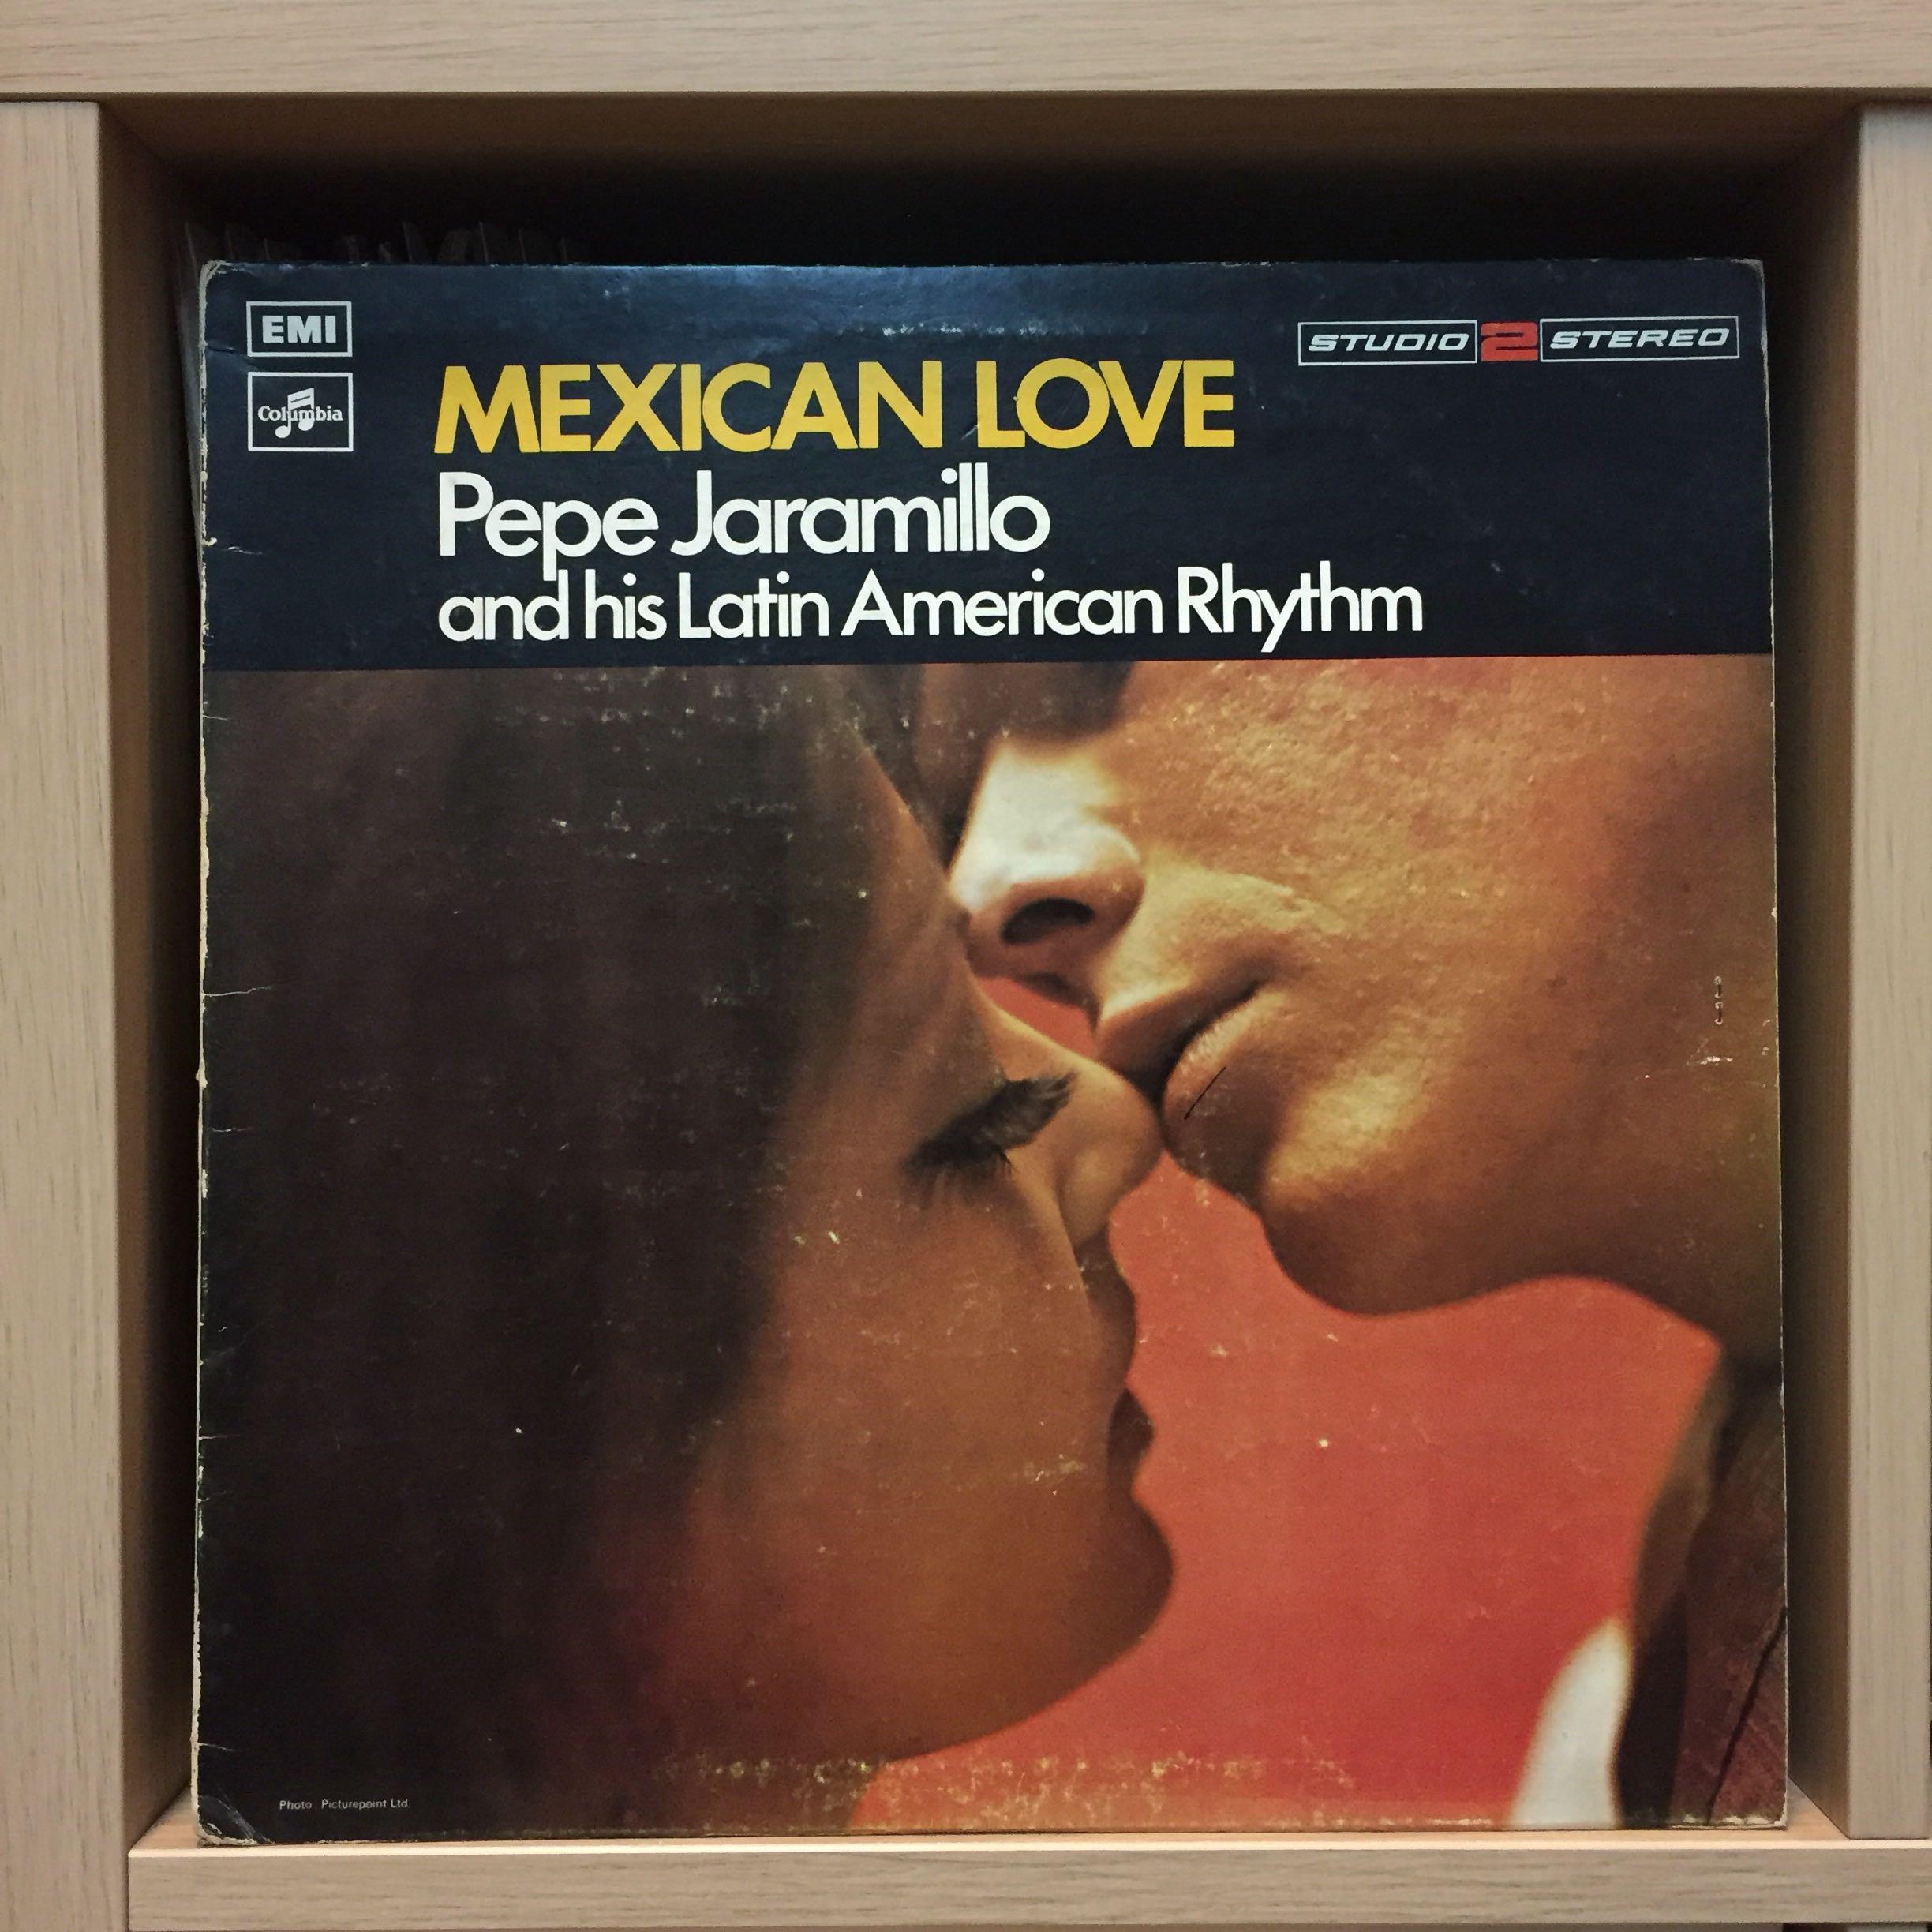 Lp Pepe Jaramillo Mexican Love Music Media Cd S Dvd S Other Media On Carousell